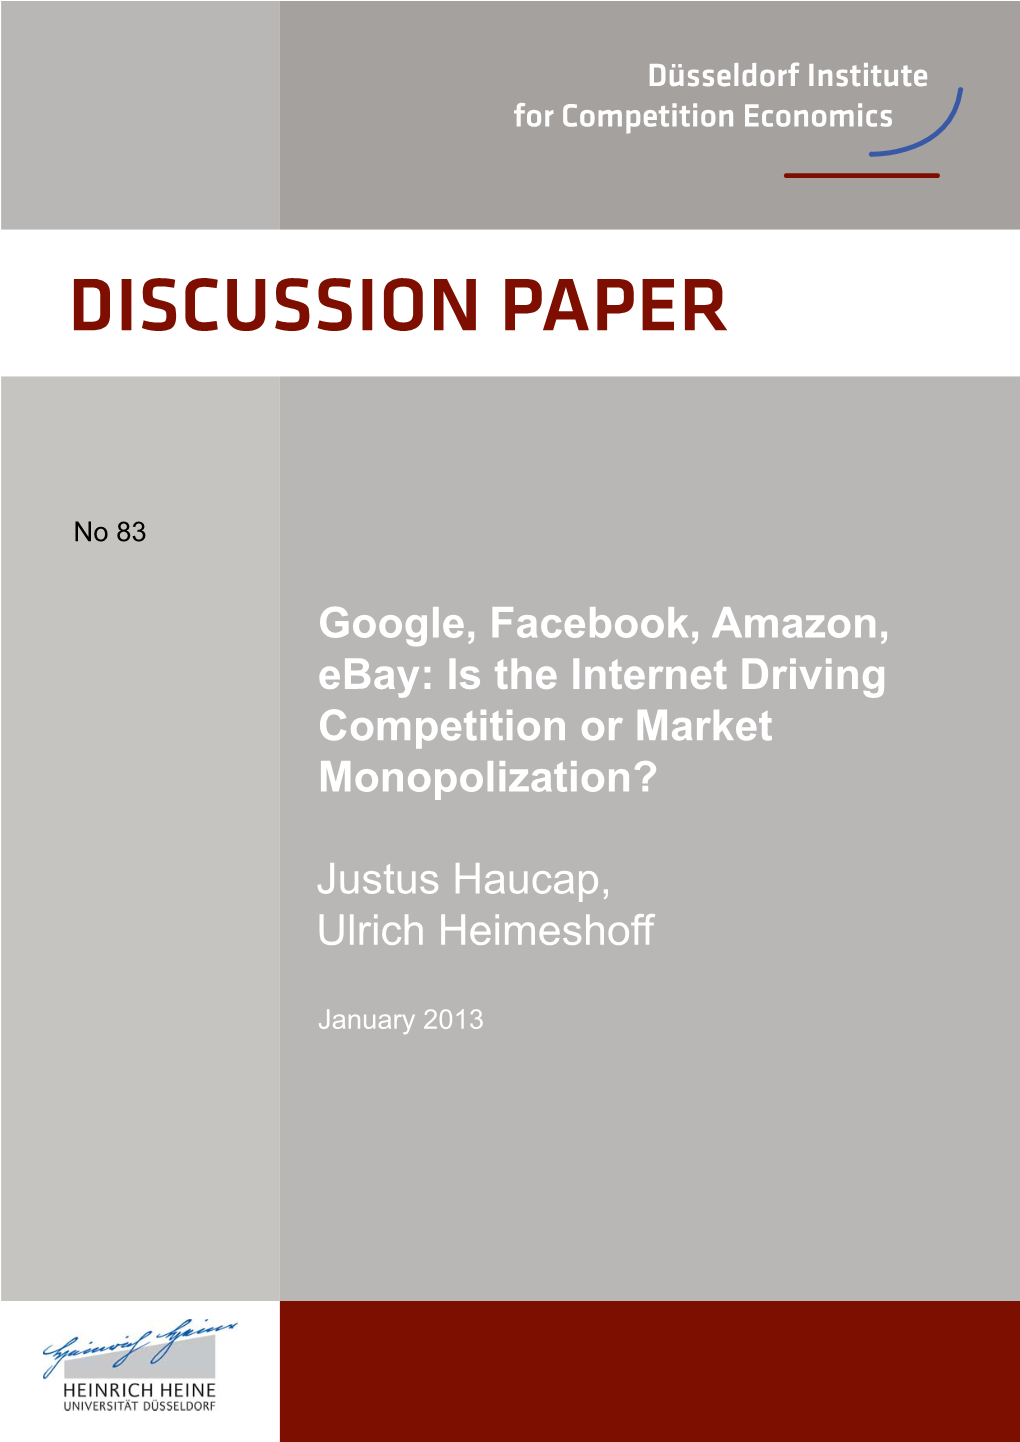 Google, Facebook, Amazon, Ebay: Is the Internet Driving Competition Or Market Monopolization?